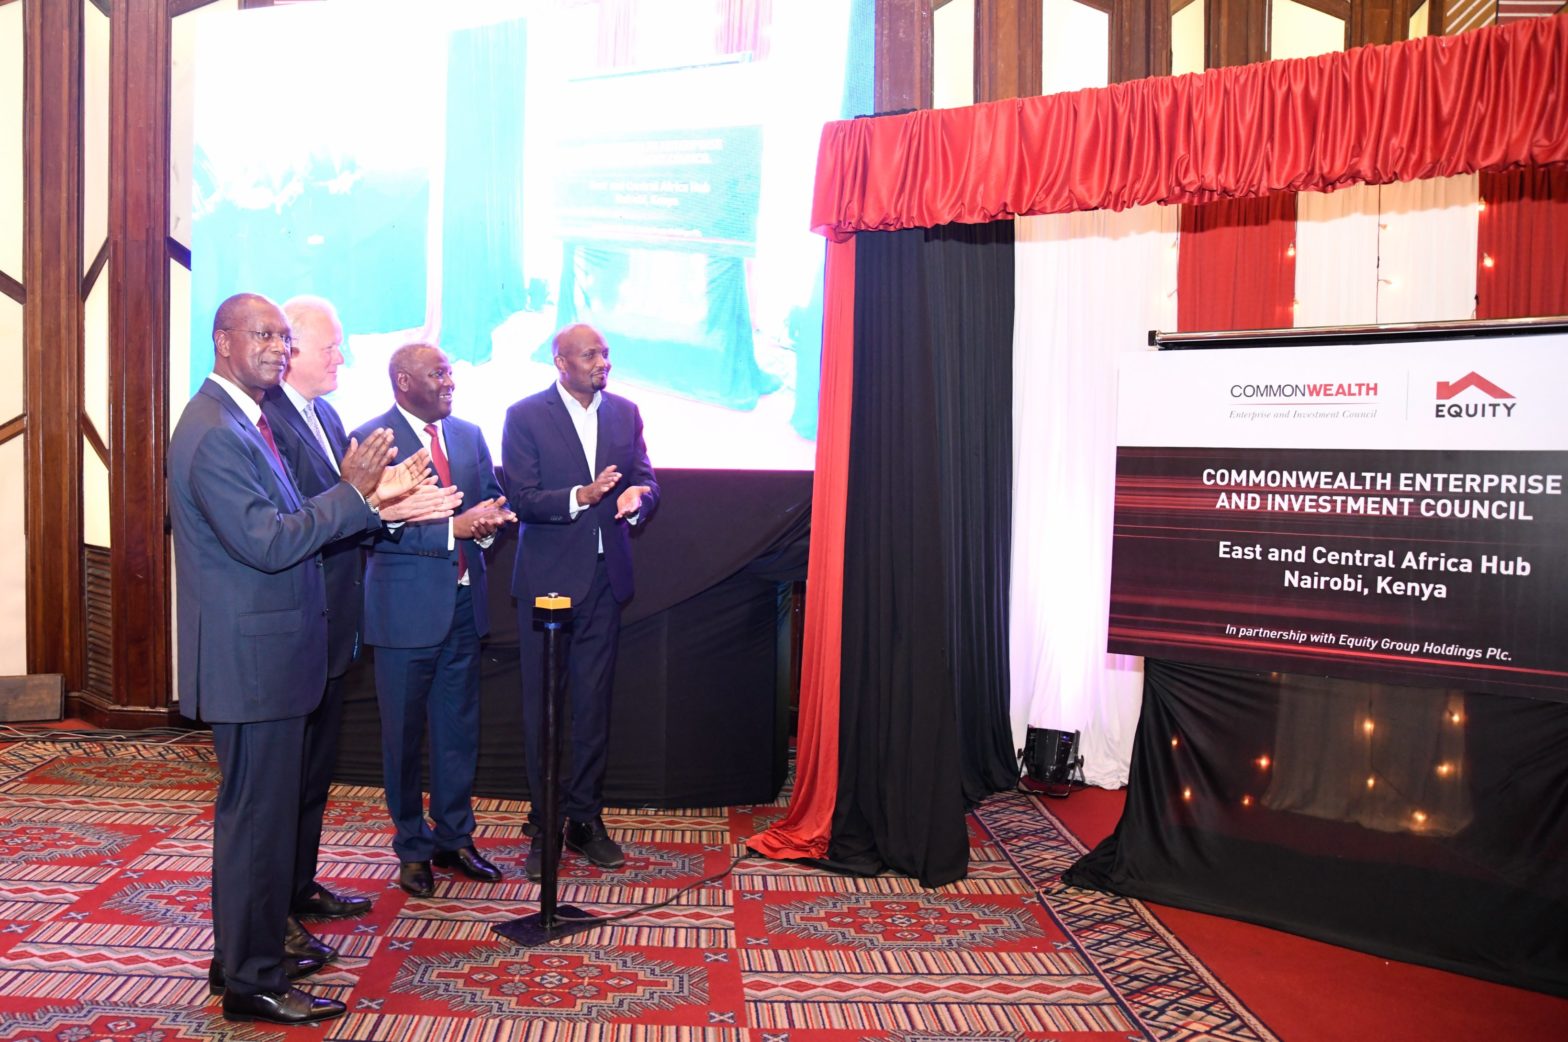 The Commonwealth Enterprise and Investment Council (CWEIC) launches its East and Central Africa Hub in Nairobi